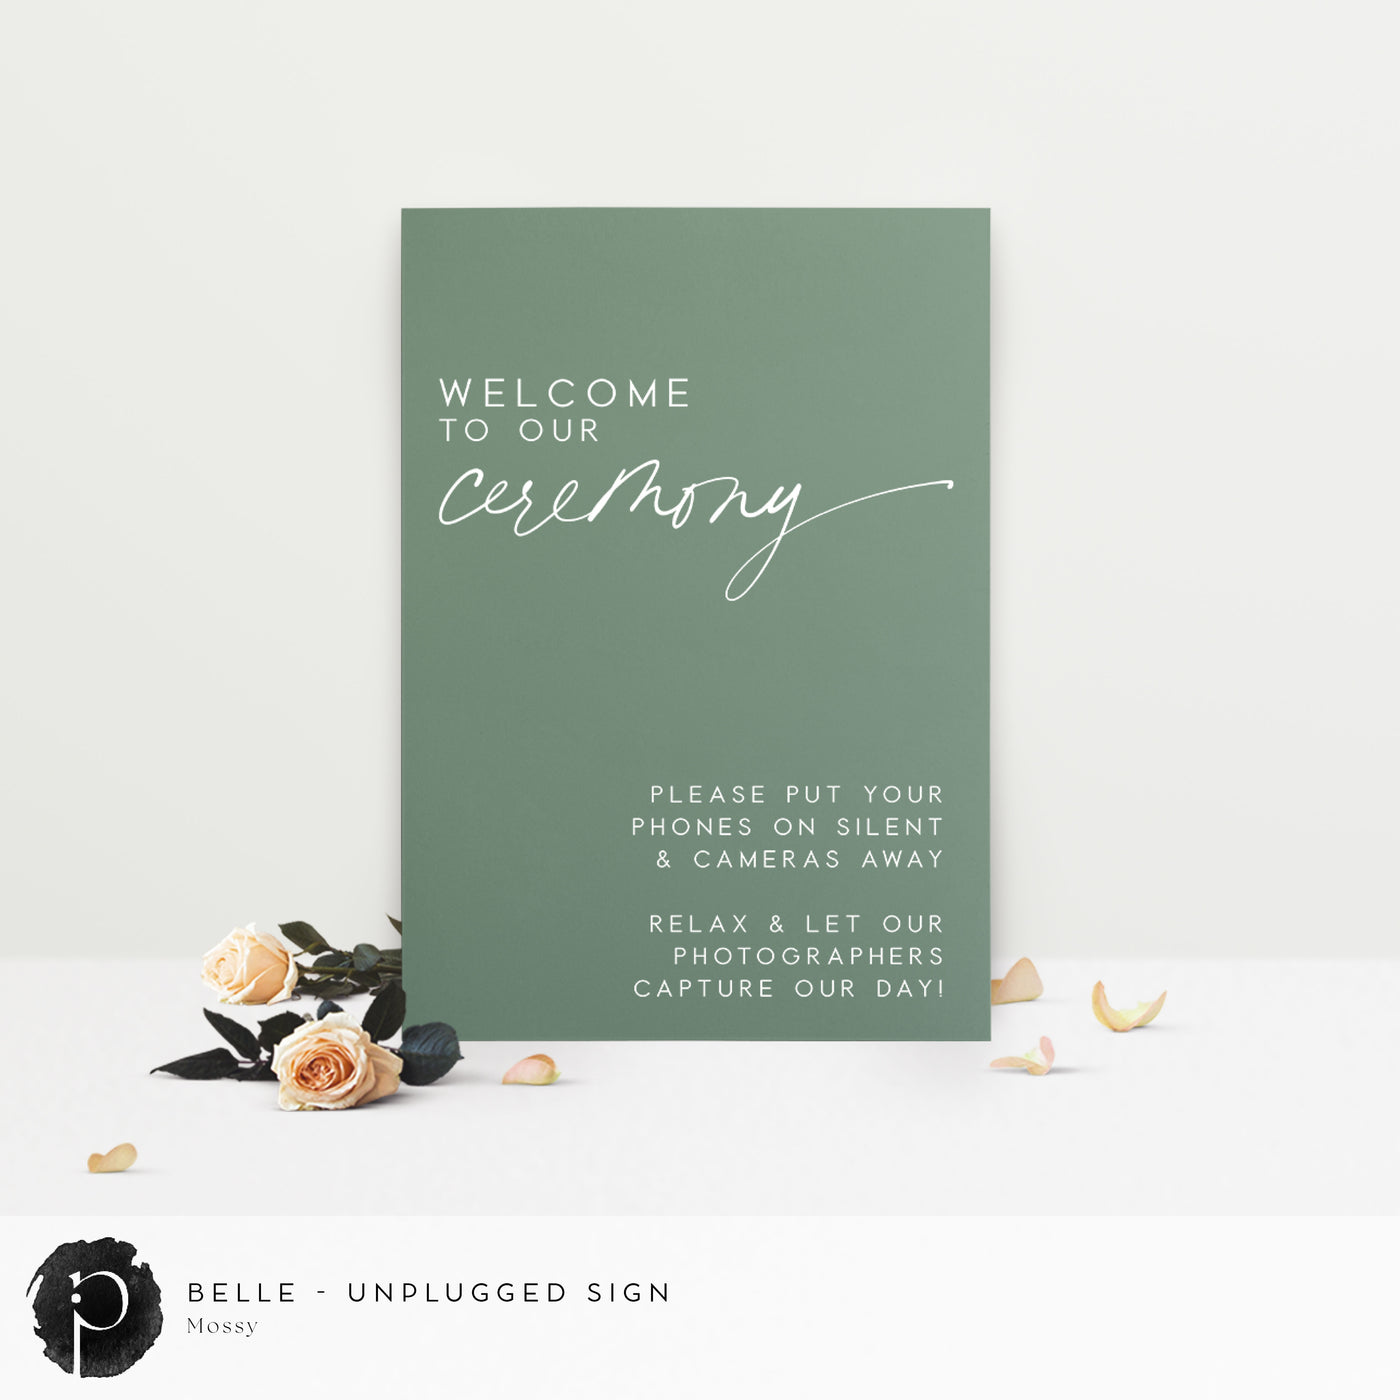 Belle - Unplugged Ceremony Sign